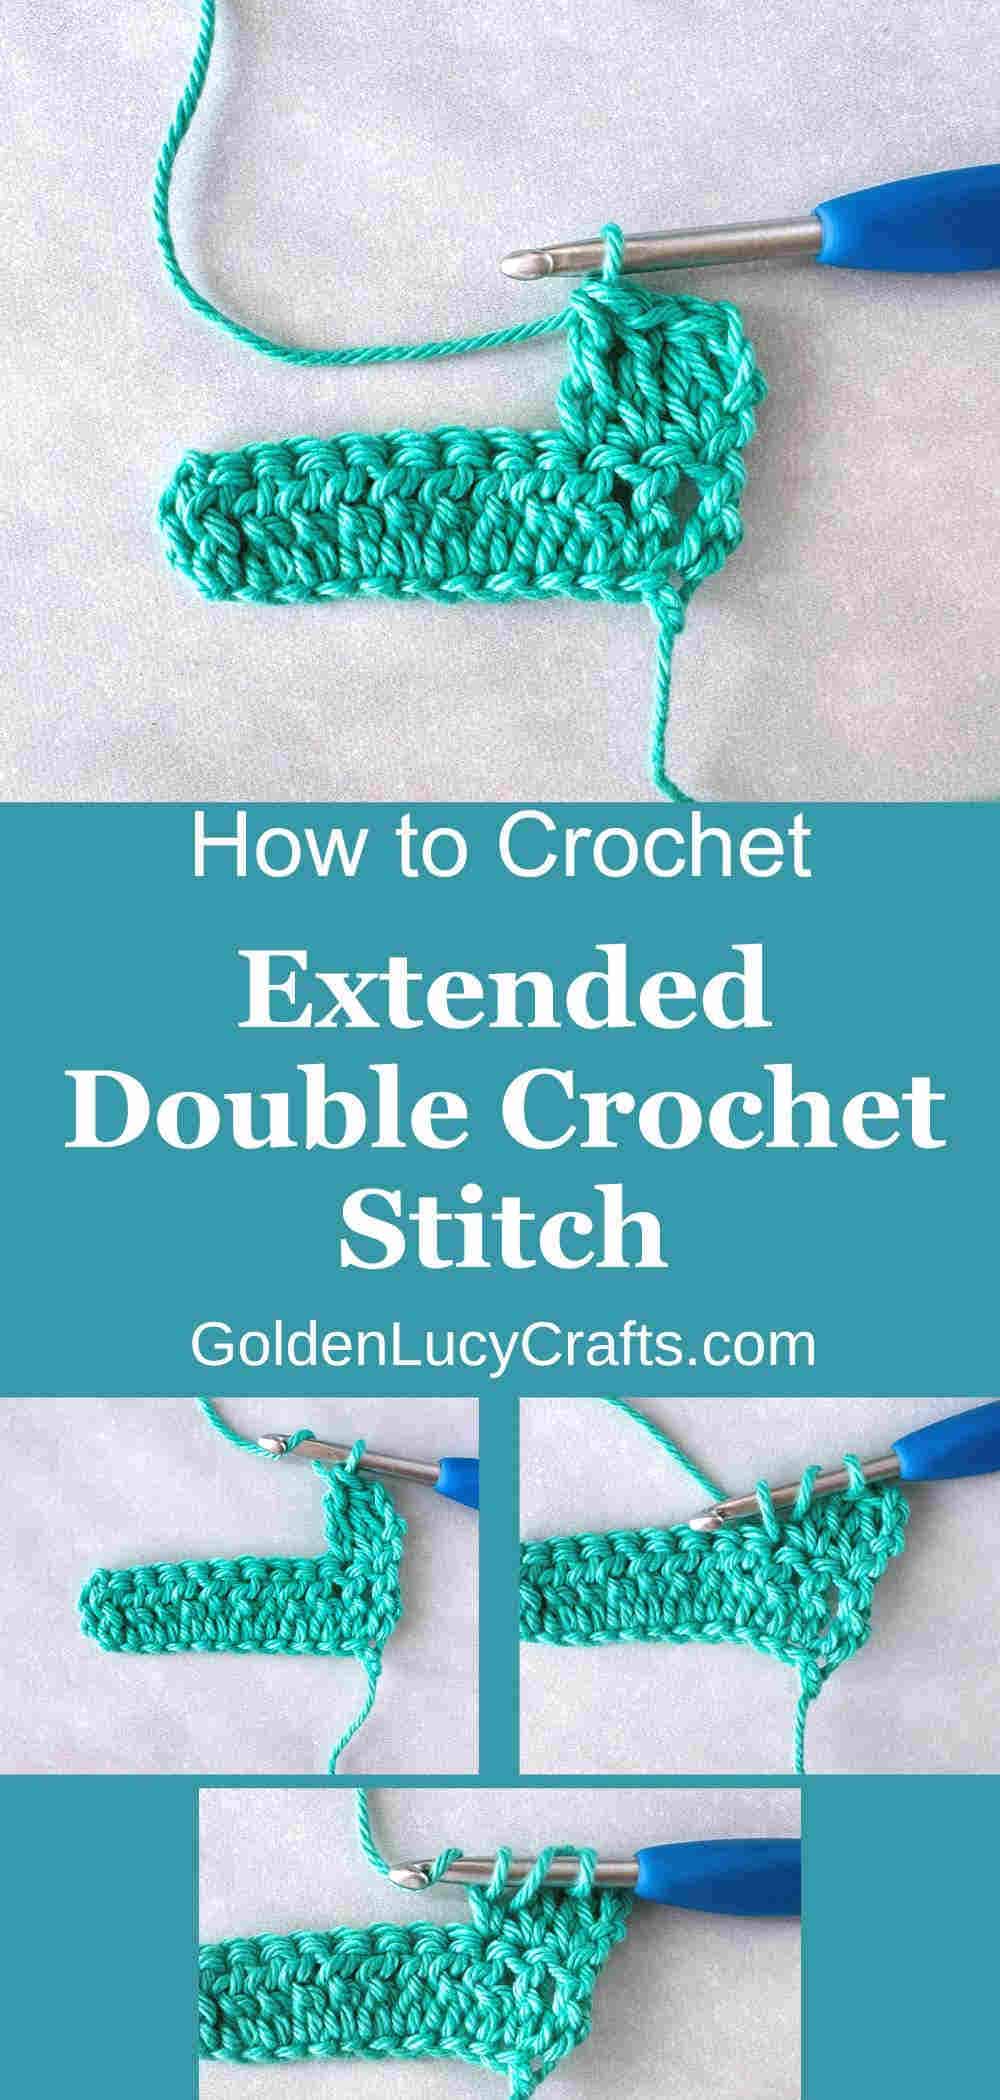 Photo collage of images on how to crochet an extended double crochet stitch.